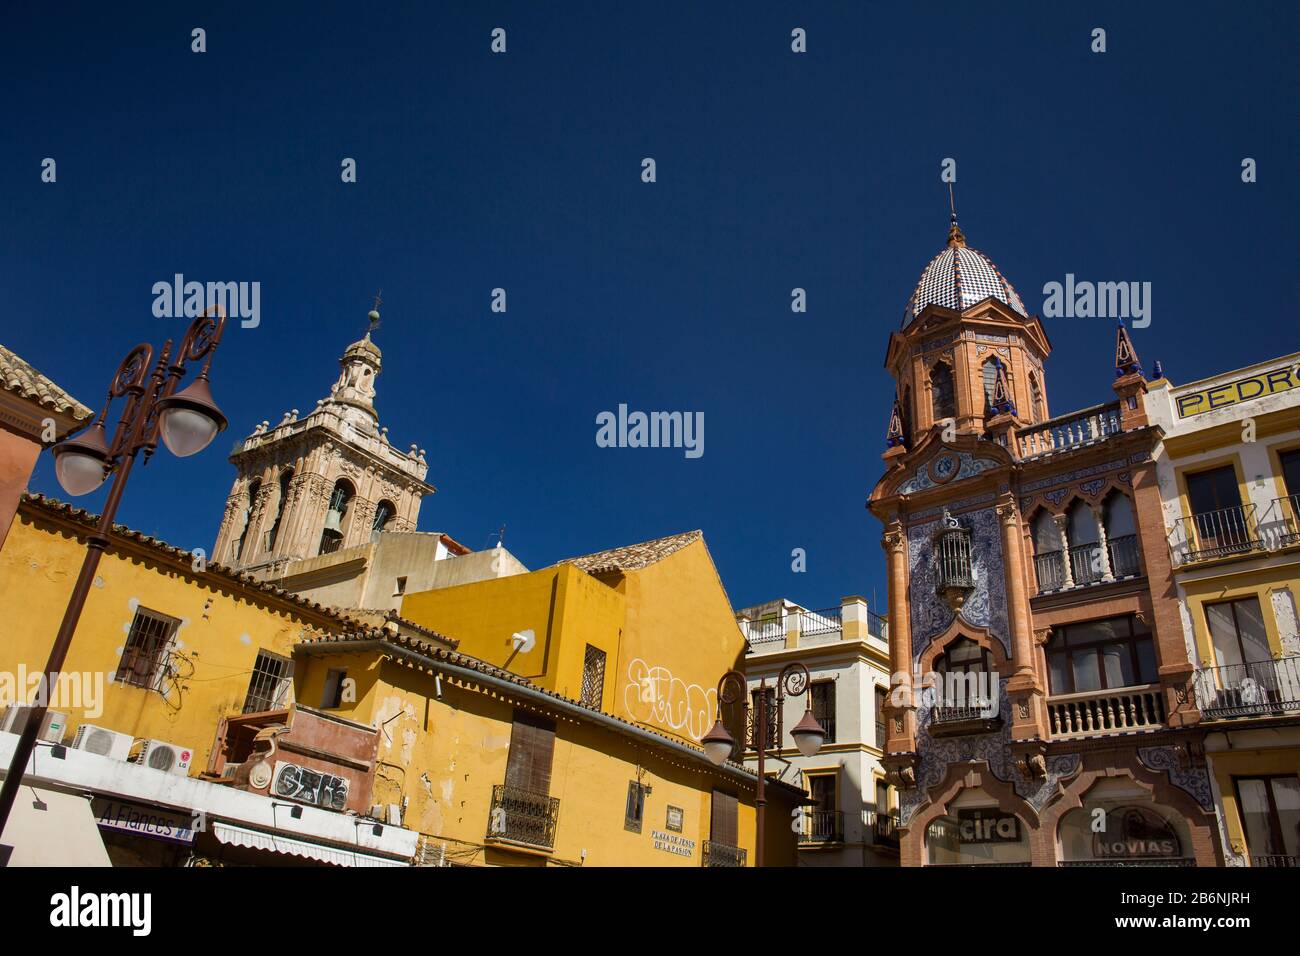 Colorful low-angle shot of the roofs of the historic buildings of Jesus de la Pasion Square, Seville, Spain Stock Photo